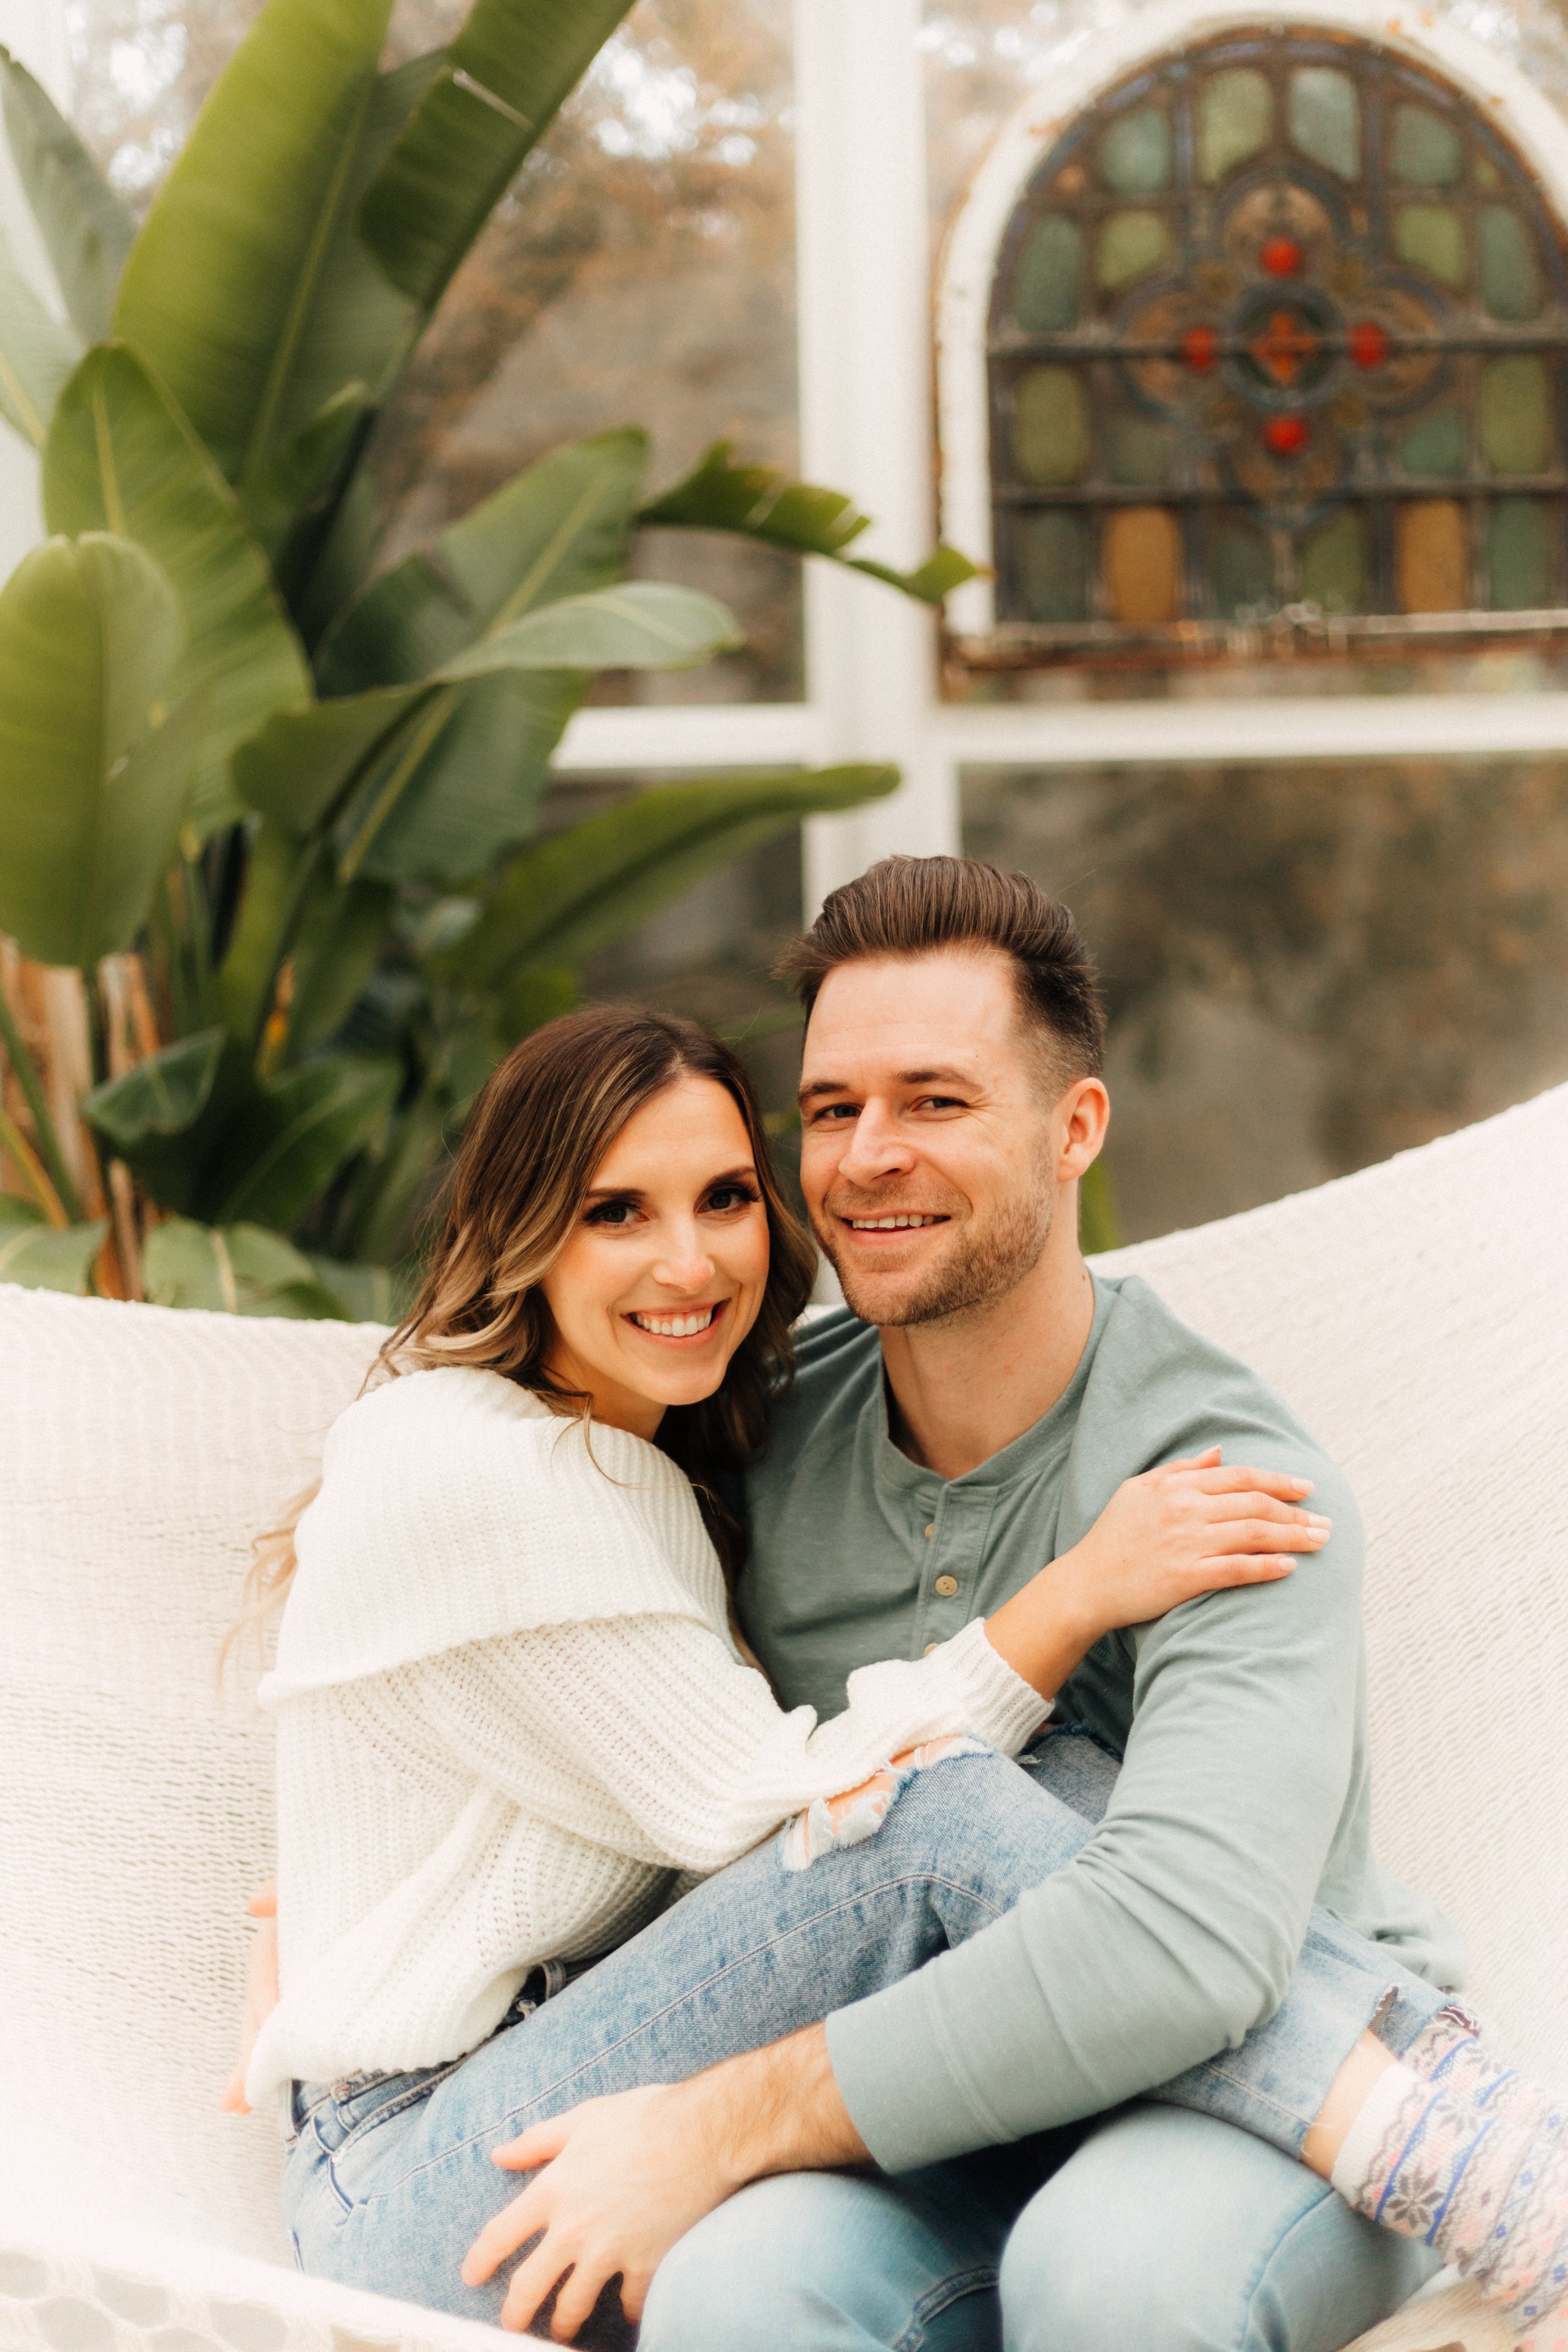 Laura_Ben_Engagment_Session_Winterset_Des_moines_Iowa_Couples_Photographer_Iris_Aisle_Cabin_Conservatory_Candid_Snow_Day_Winter_KMP_Photography-2576.jpg